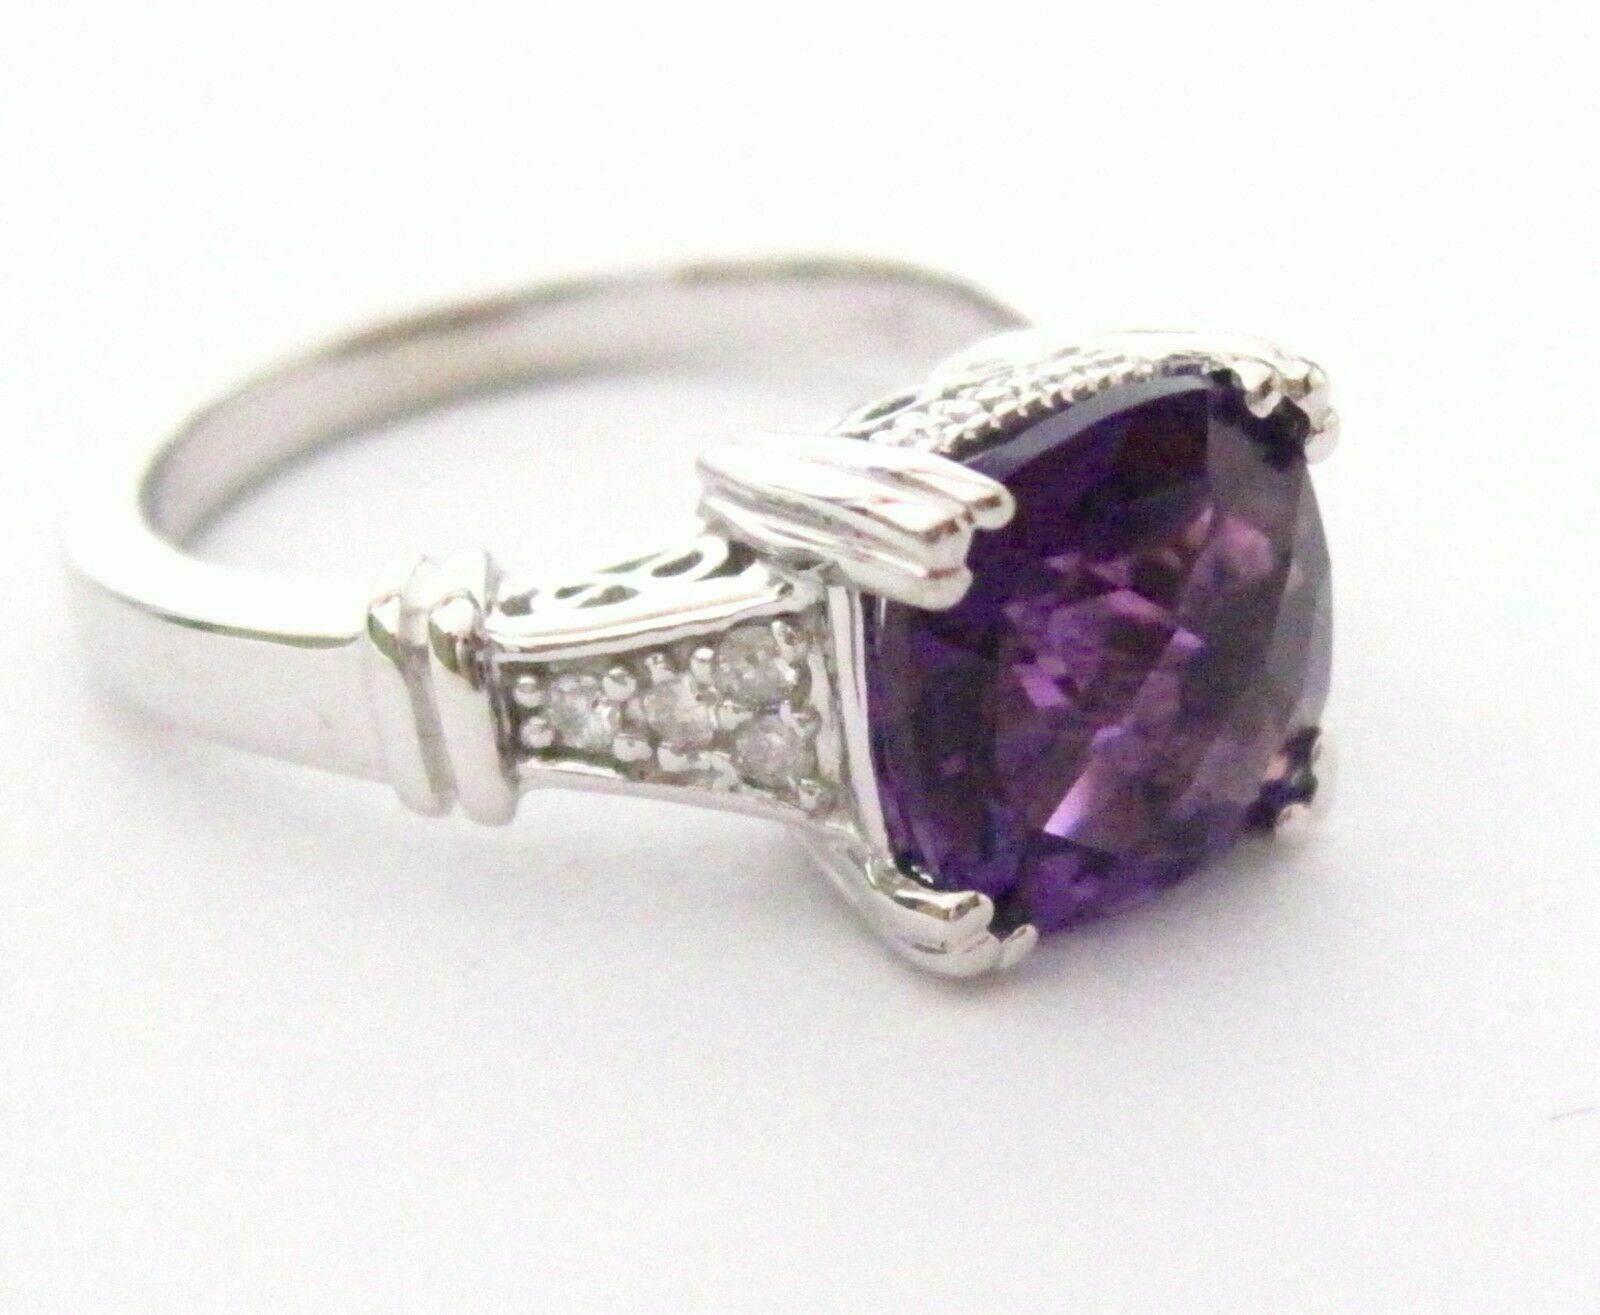 Fine Natural Cushion Amethyst & Diamond Solitaire Ring Size 6.5 14k W/G